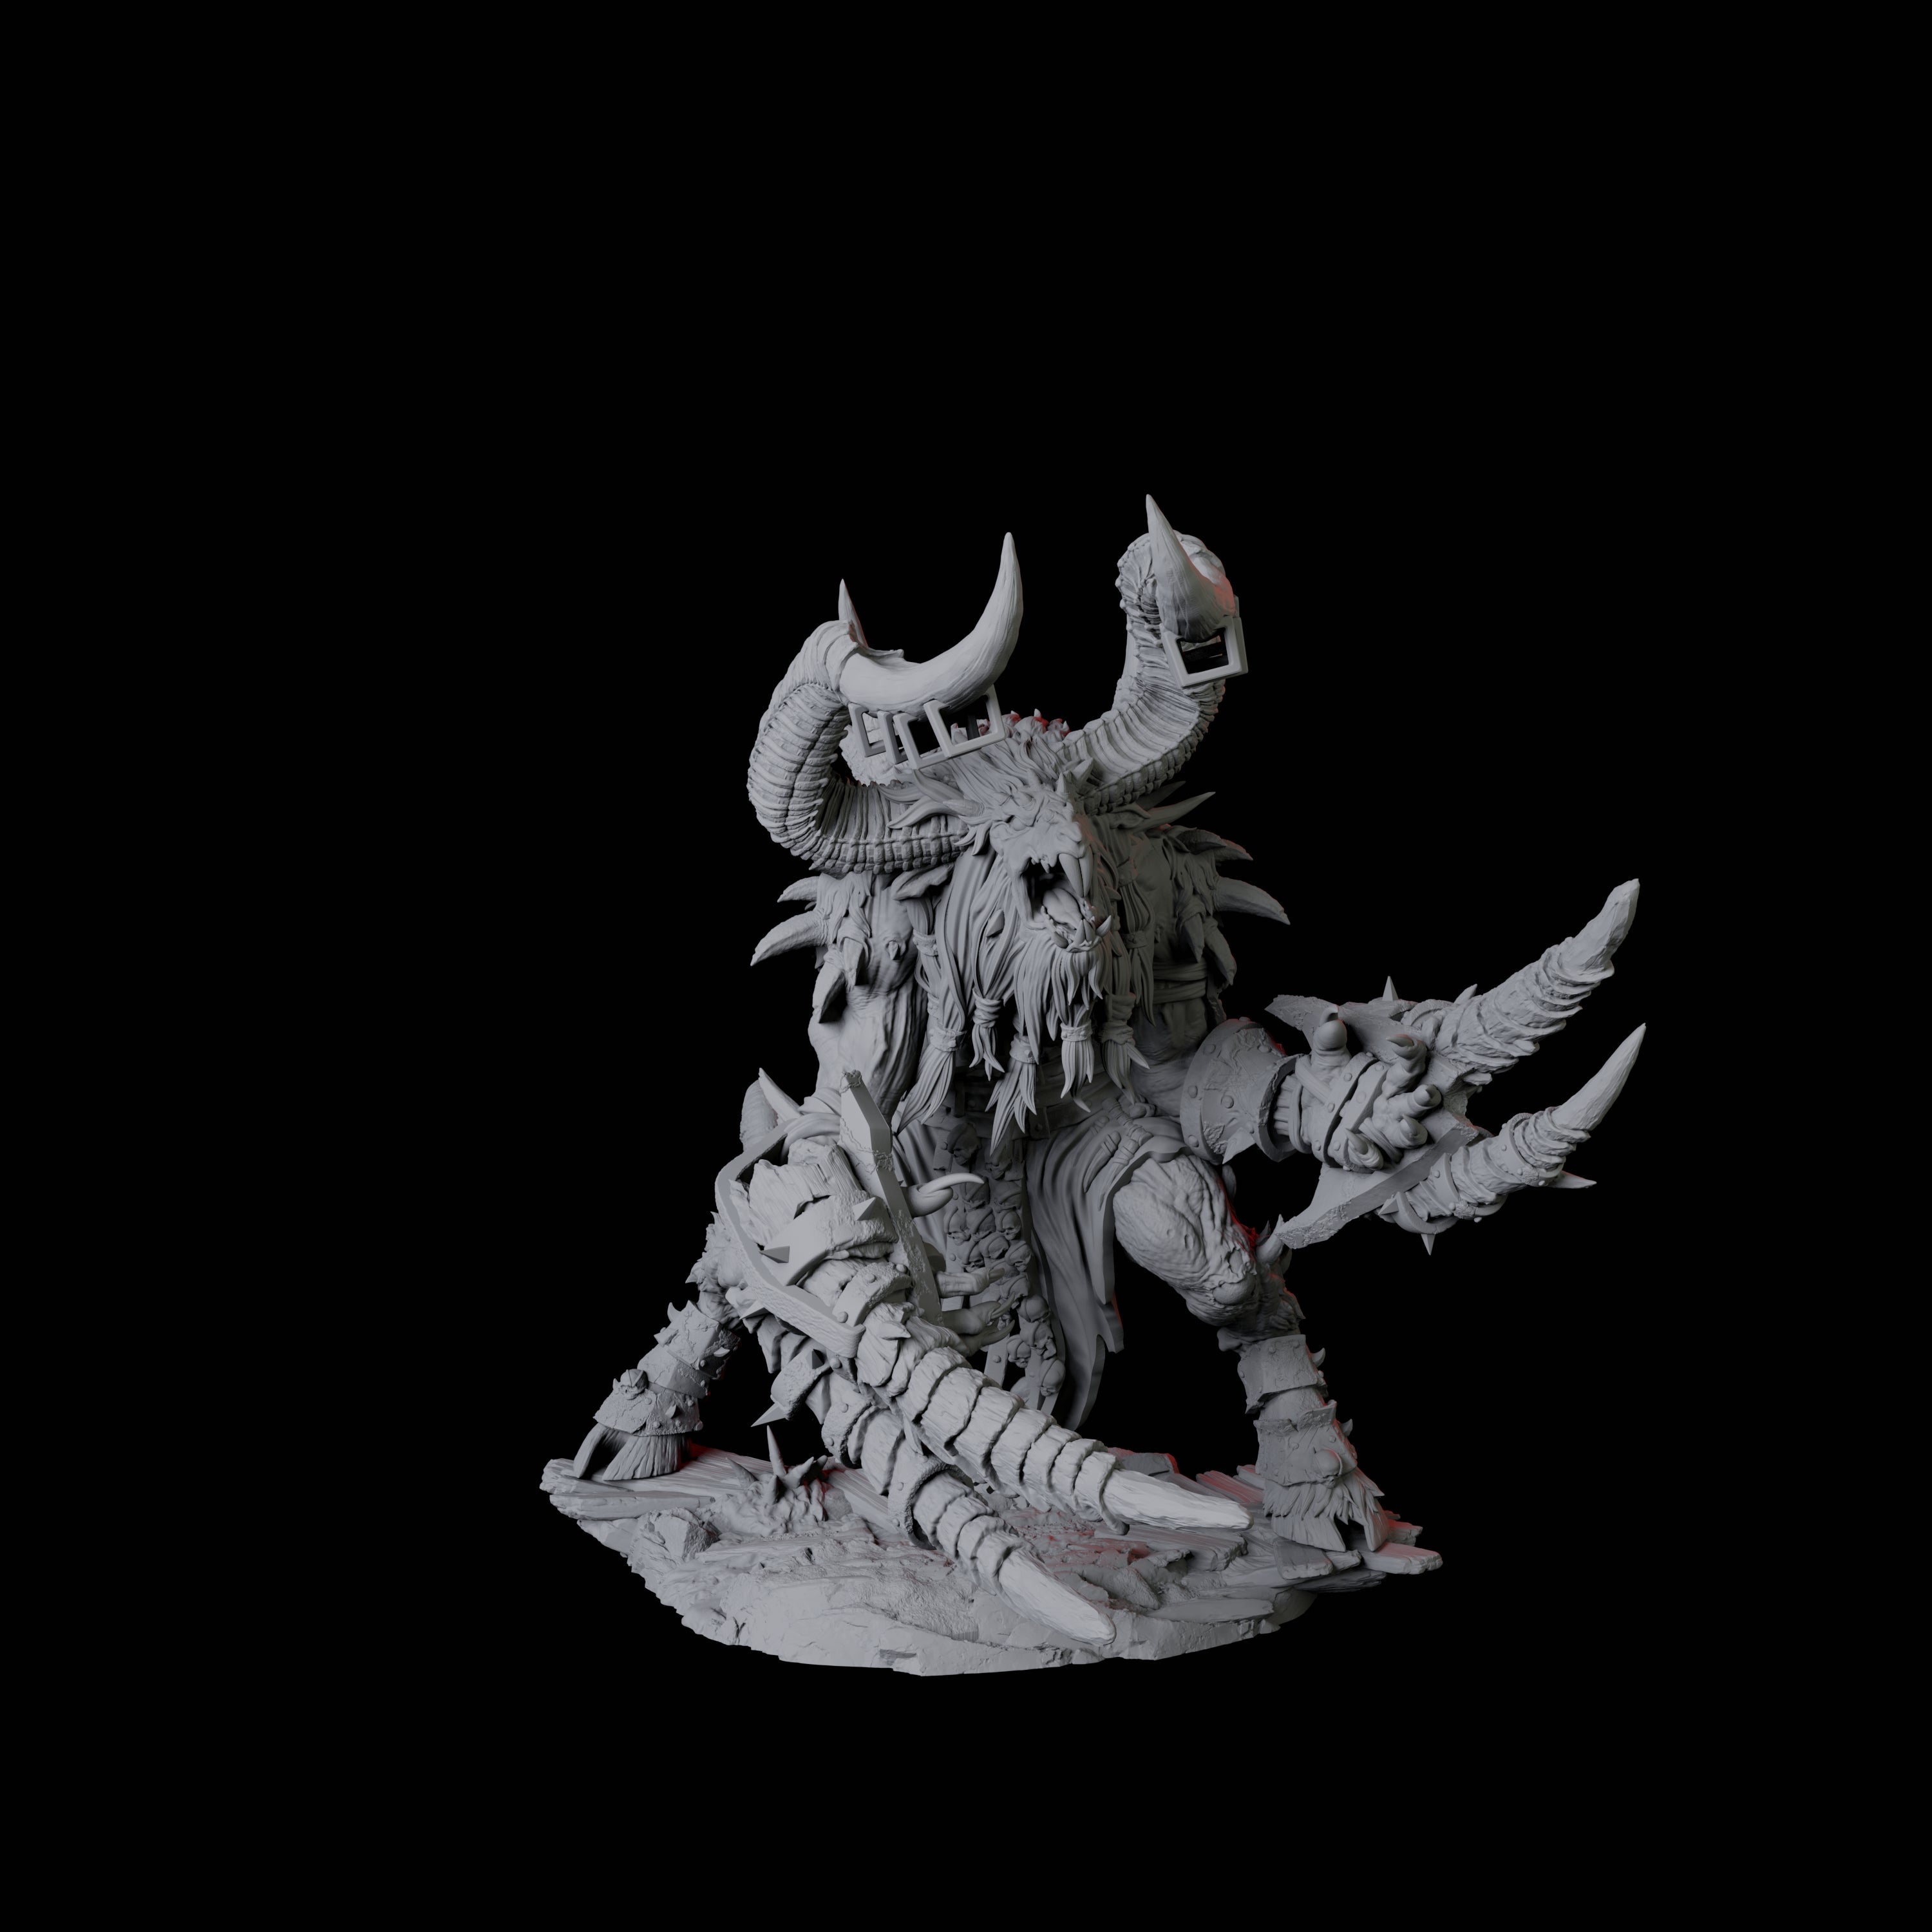 Giant Ratfolk Barbarian D Miniature for Dungeons and Dragons, Pathfinder or other TTRPGs